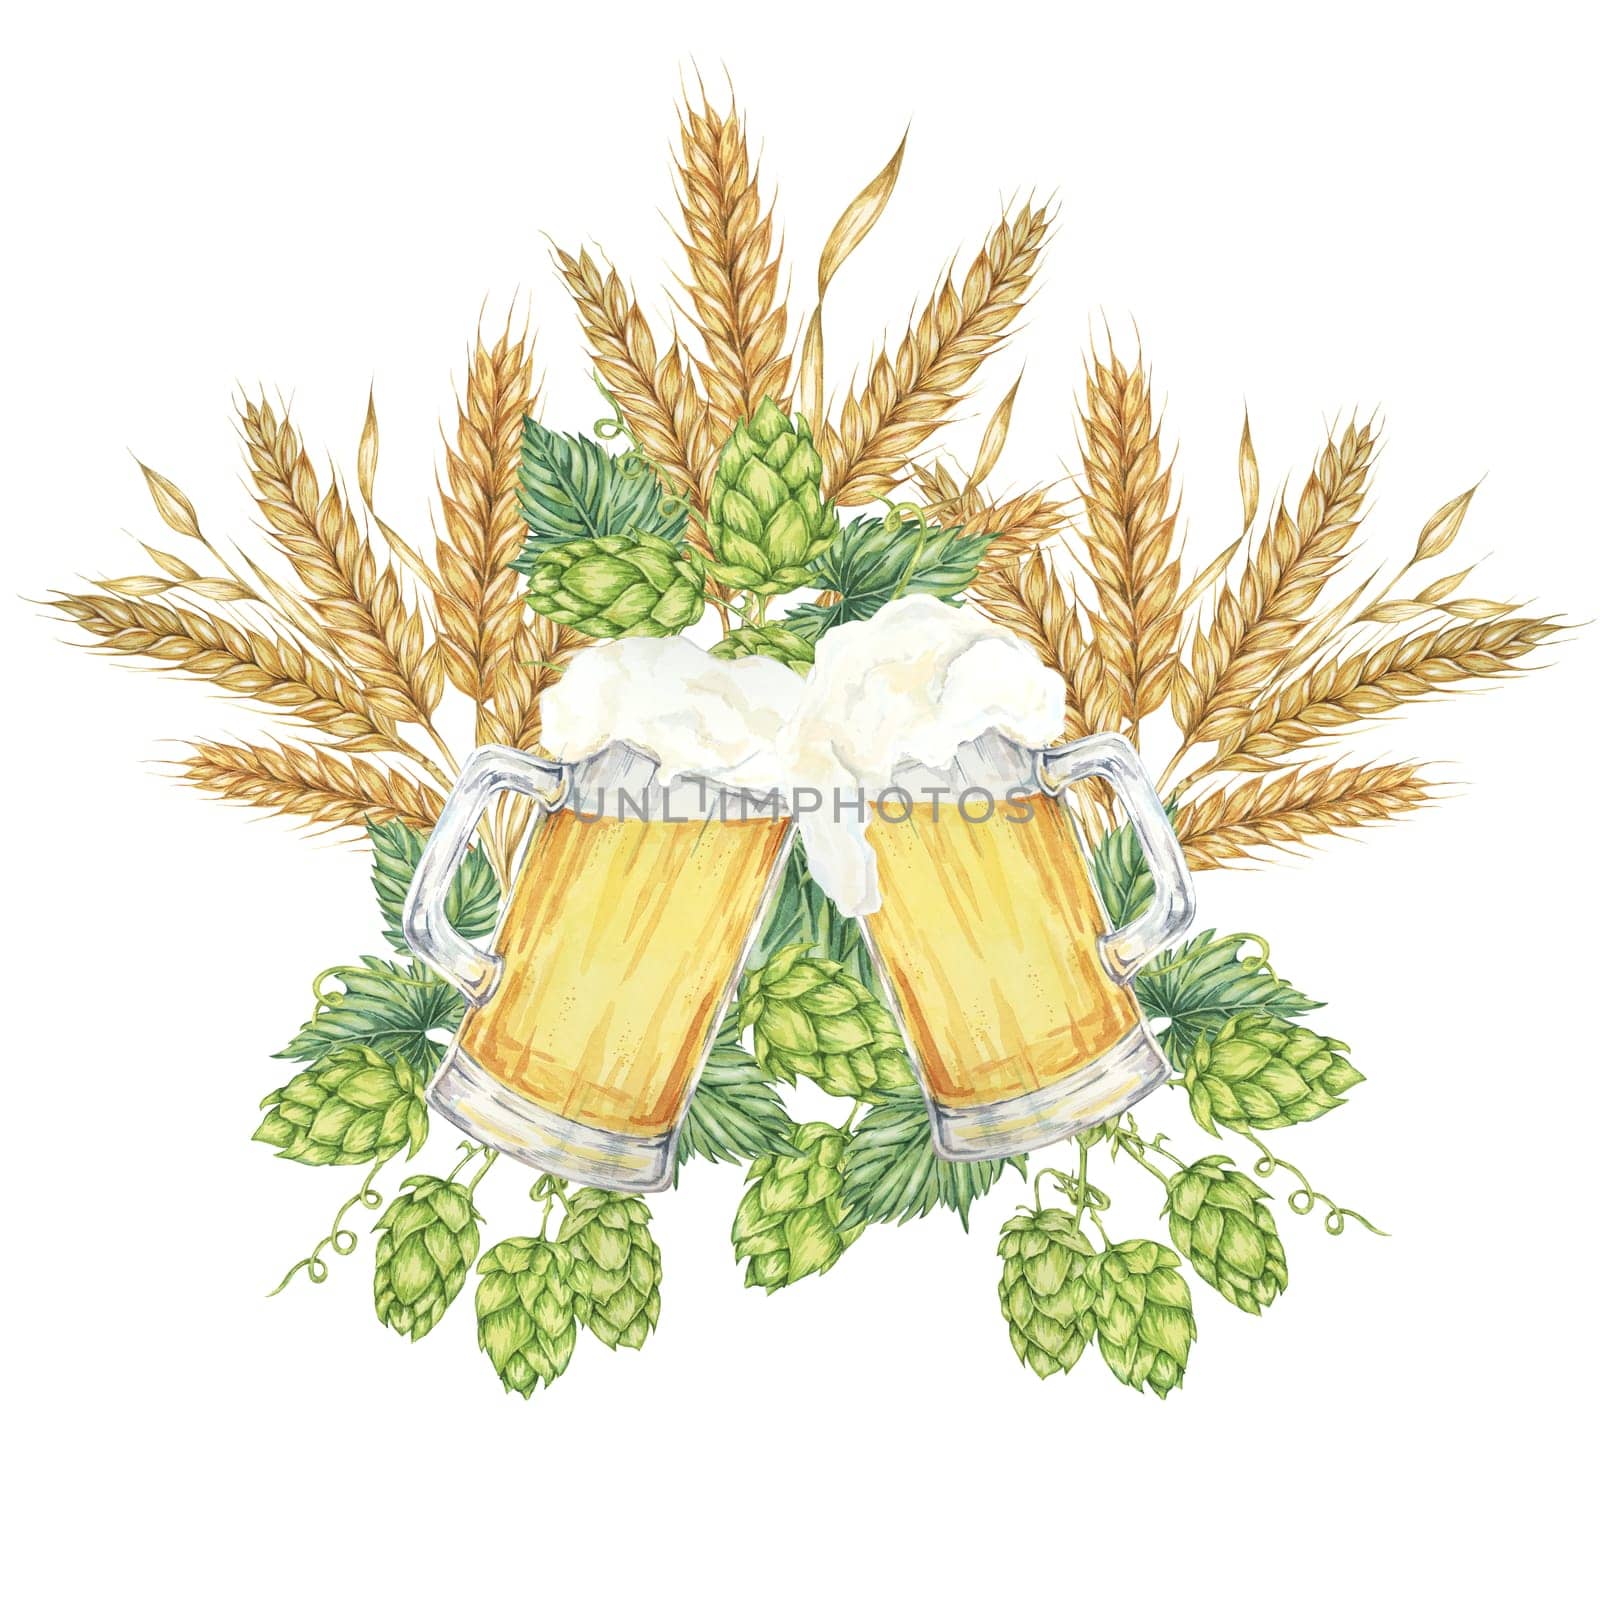 Cheers with beer mugs filled with light beer and surrounded by barley ears, wheat and hops in watercolor. Clipart for festive designs, brewery, flyer by Fofito